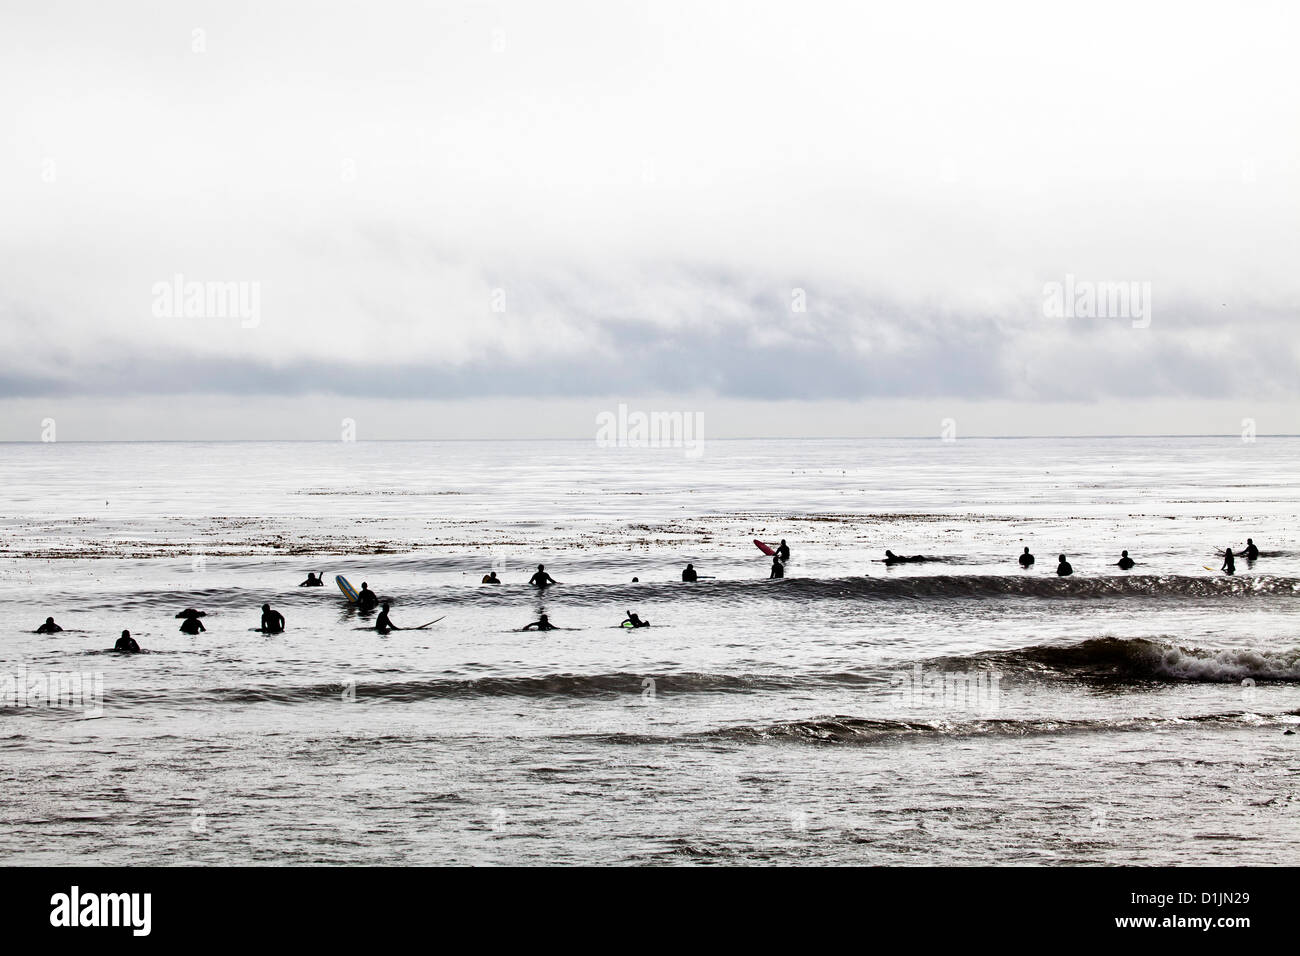 Surfers, waiting for a wave, Malibu, Los Angeles County, California, United States of America Stock Photo